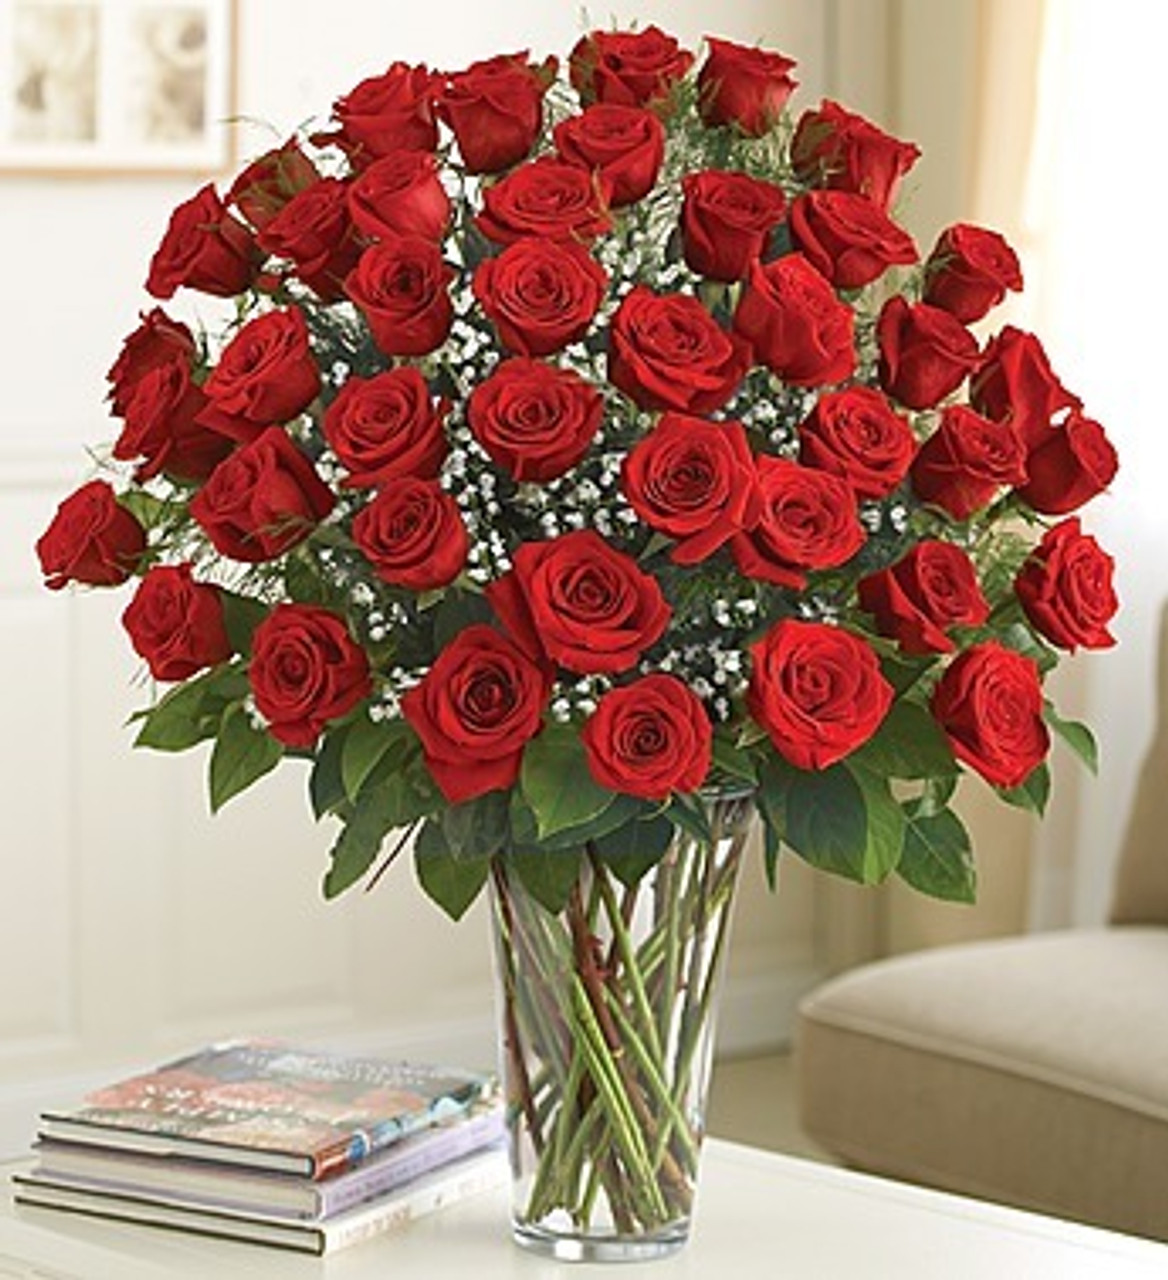 bouquet of red roses in vase